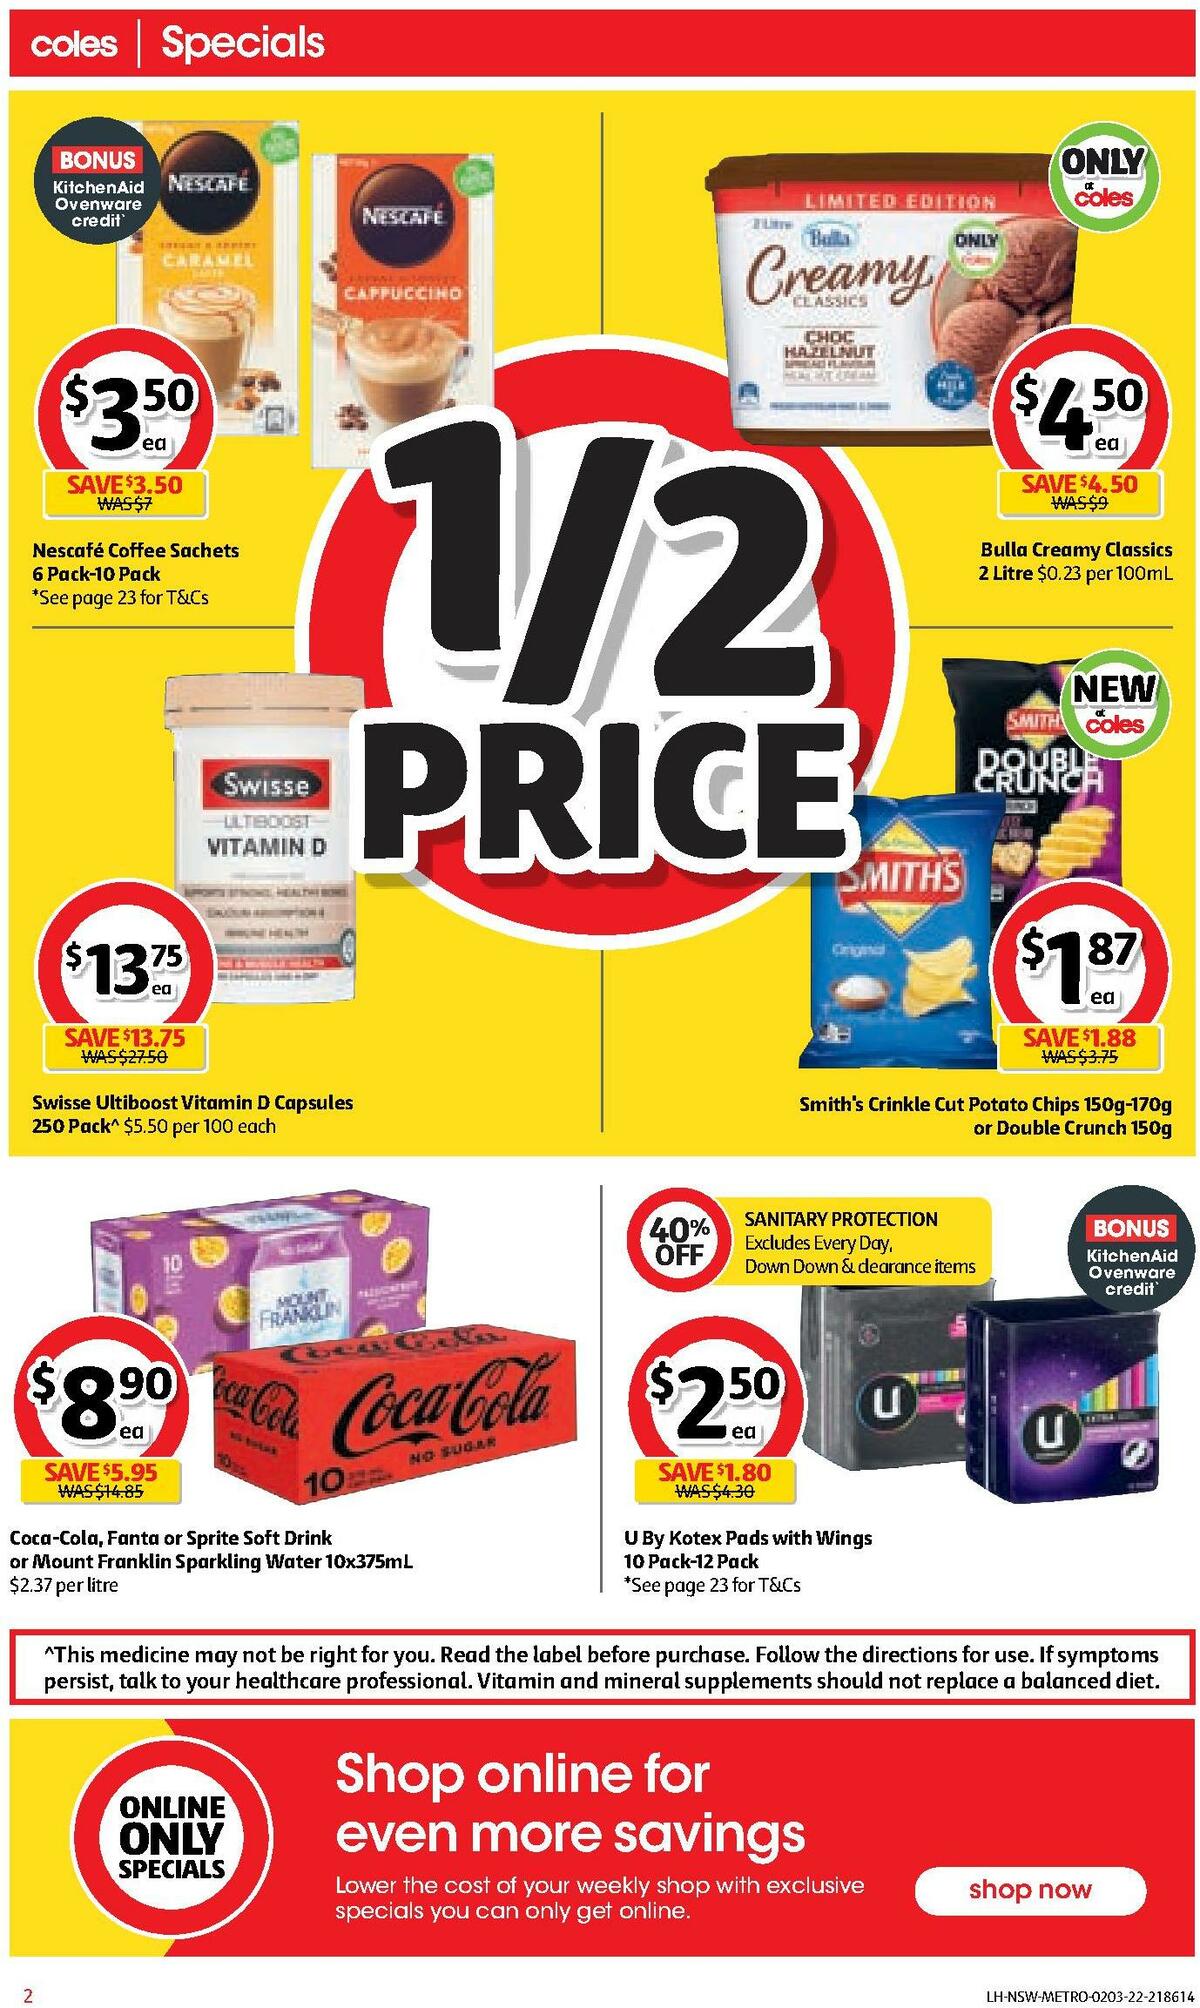 Coles Catalogues from 2 March